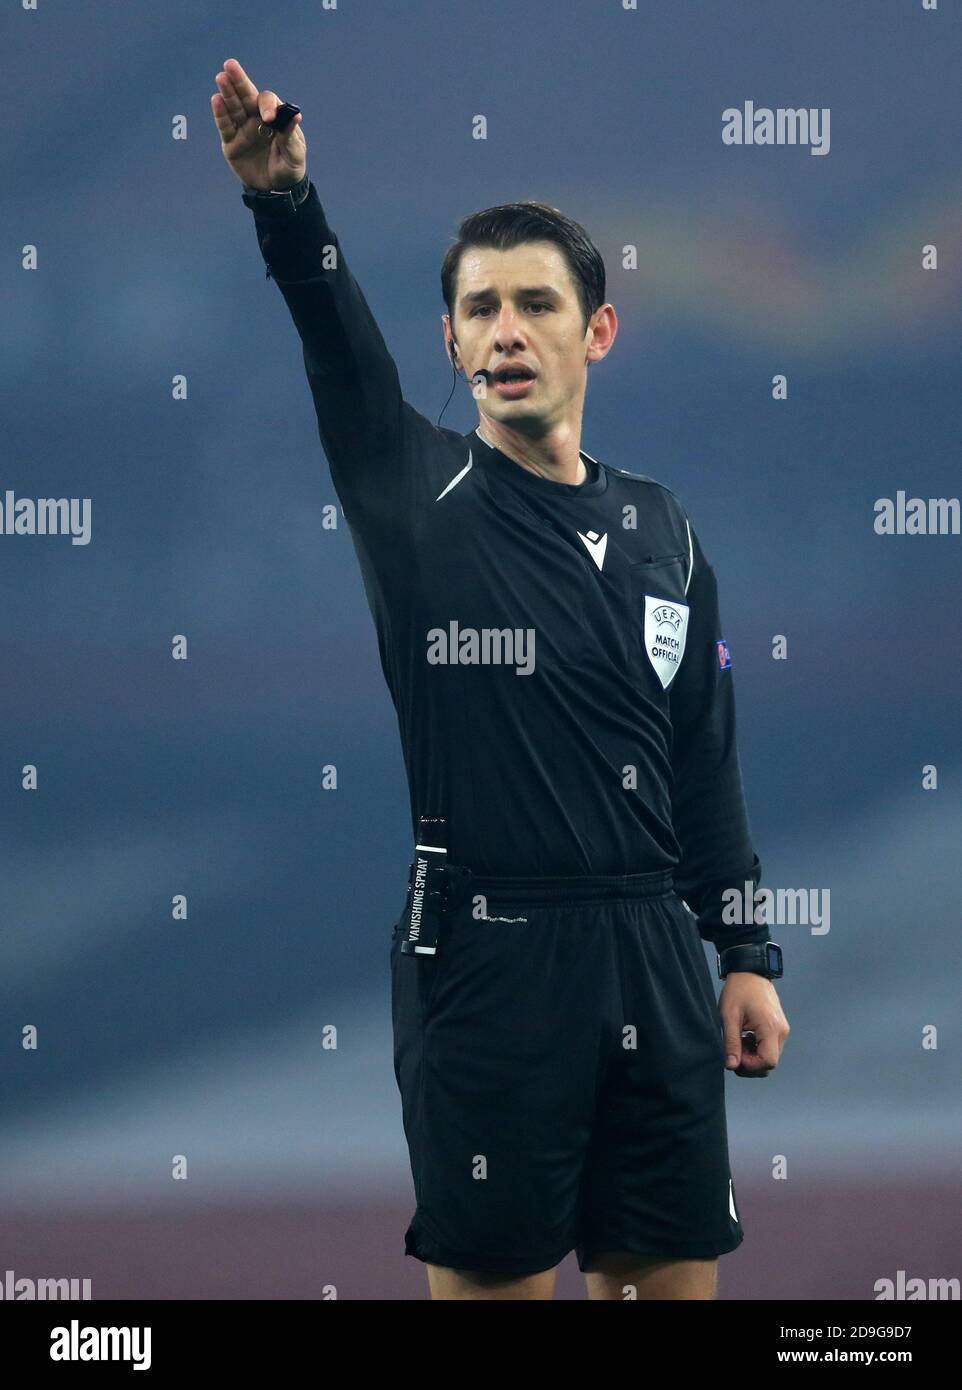 Match referee Halil Meler during the UEFA Europa League Group B match at the Emirates Stadium, London. Stock Photo